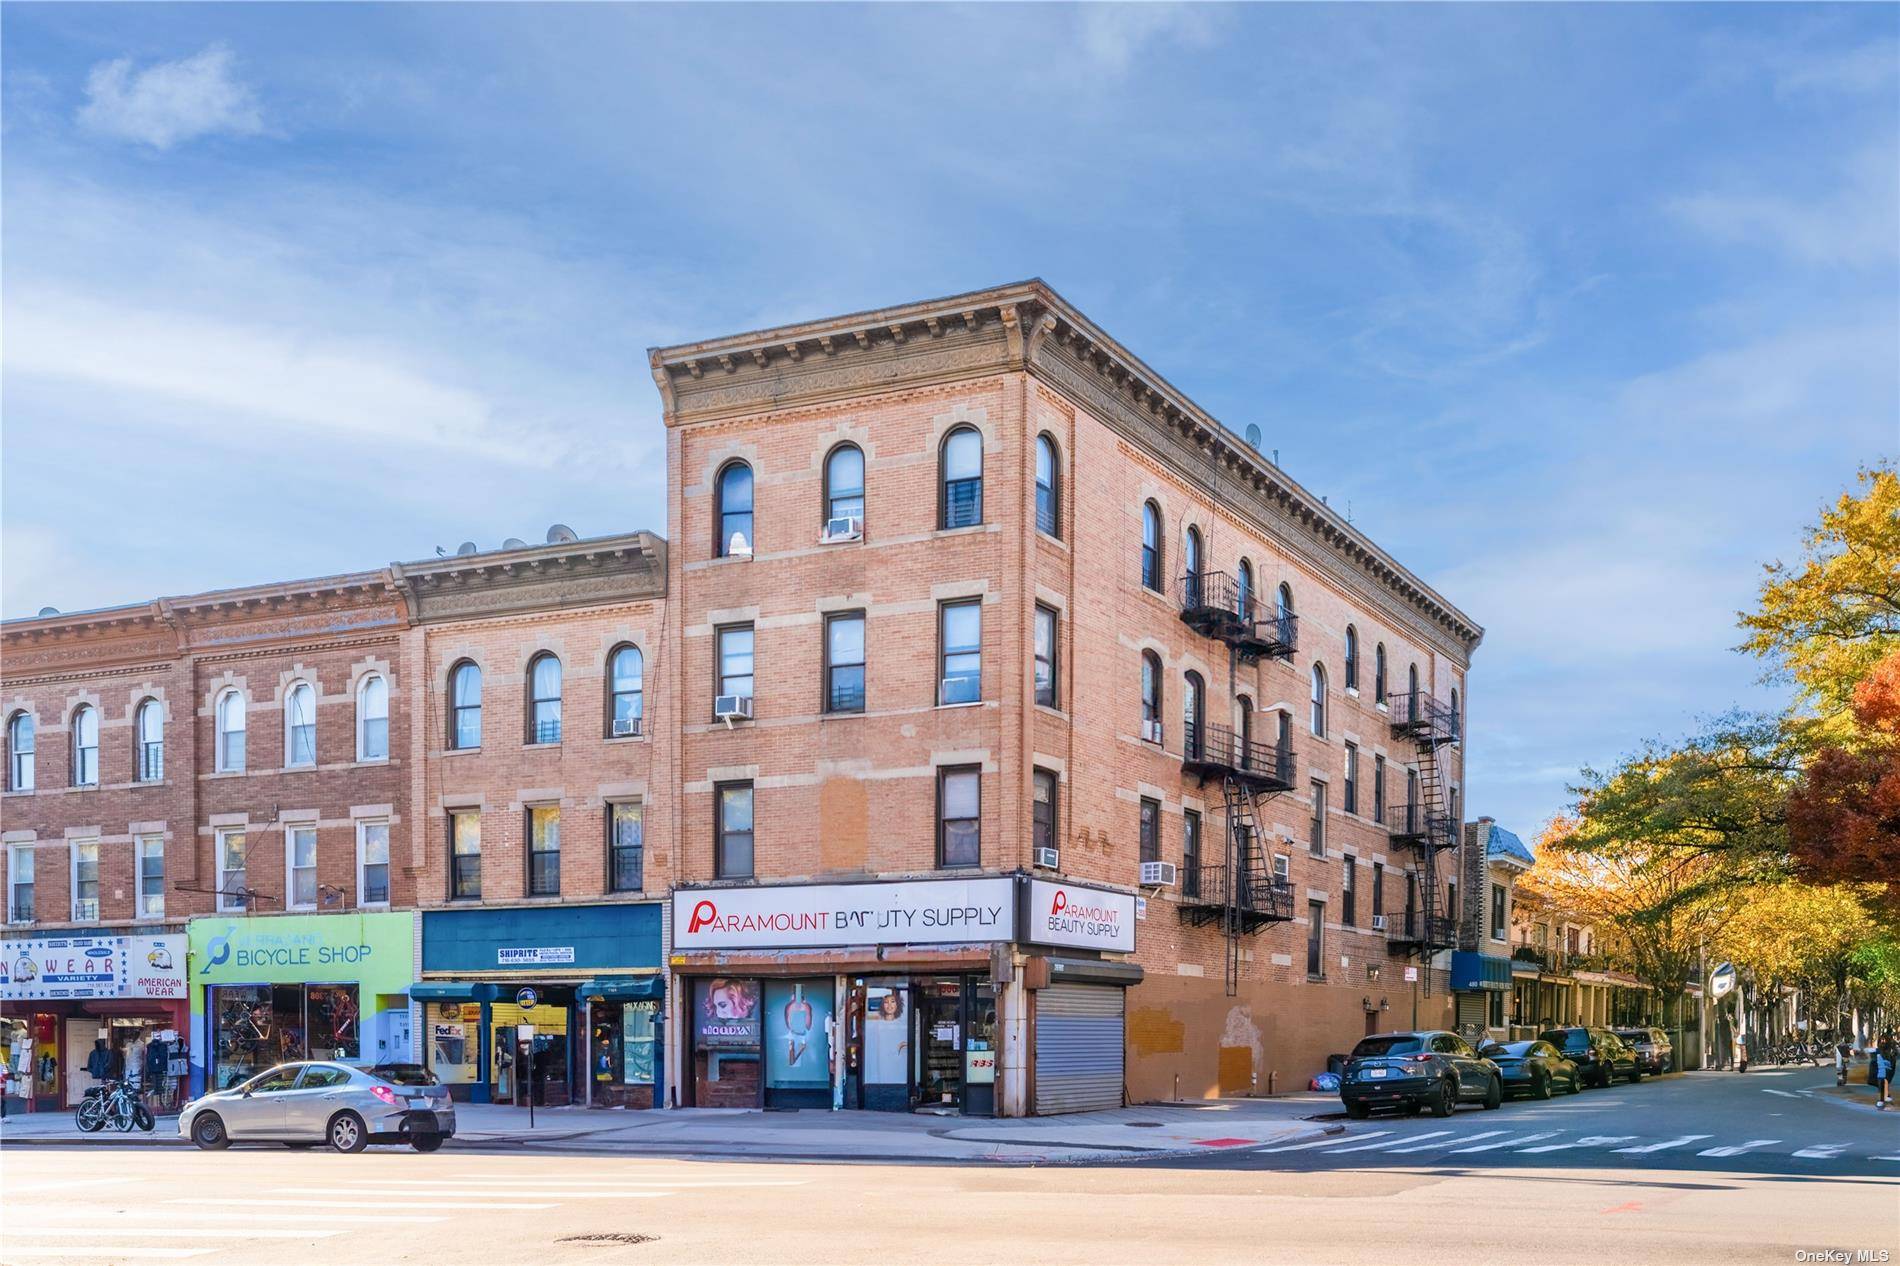 We are excited to present this mixed use building consisting of eight units for sale in the Bay Ridge neighborhood of Brooklyn.